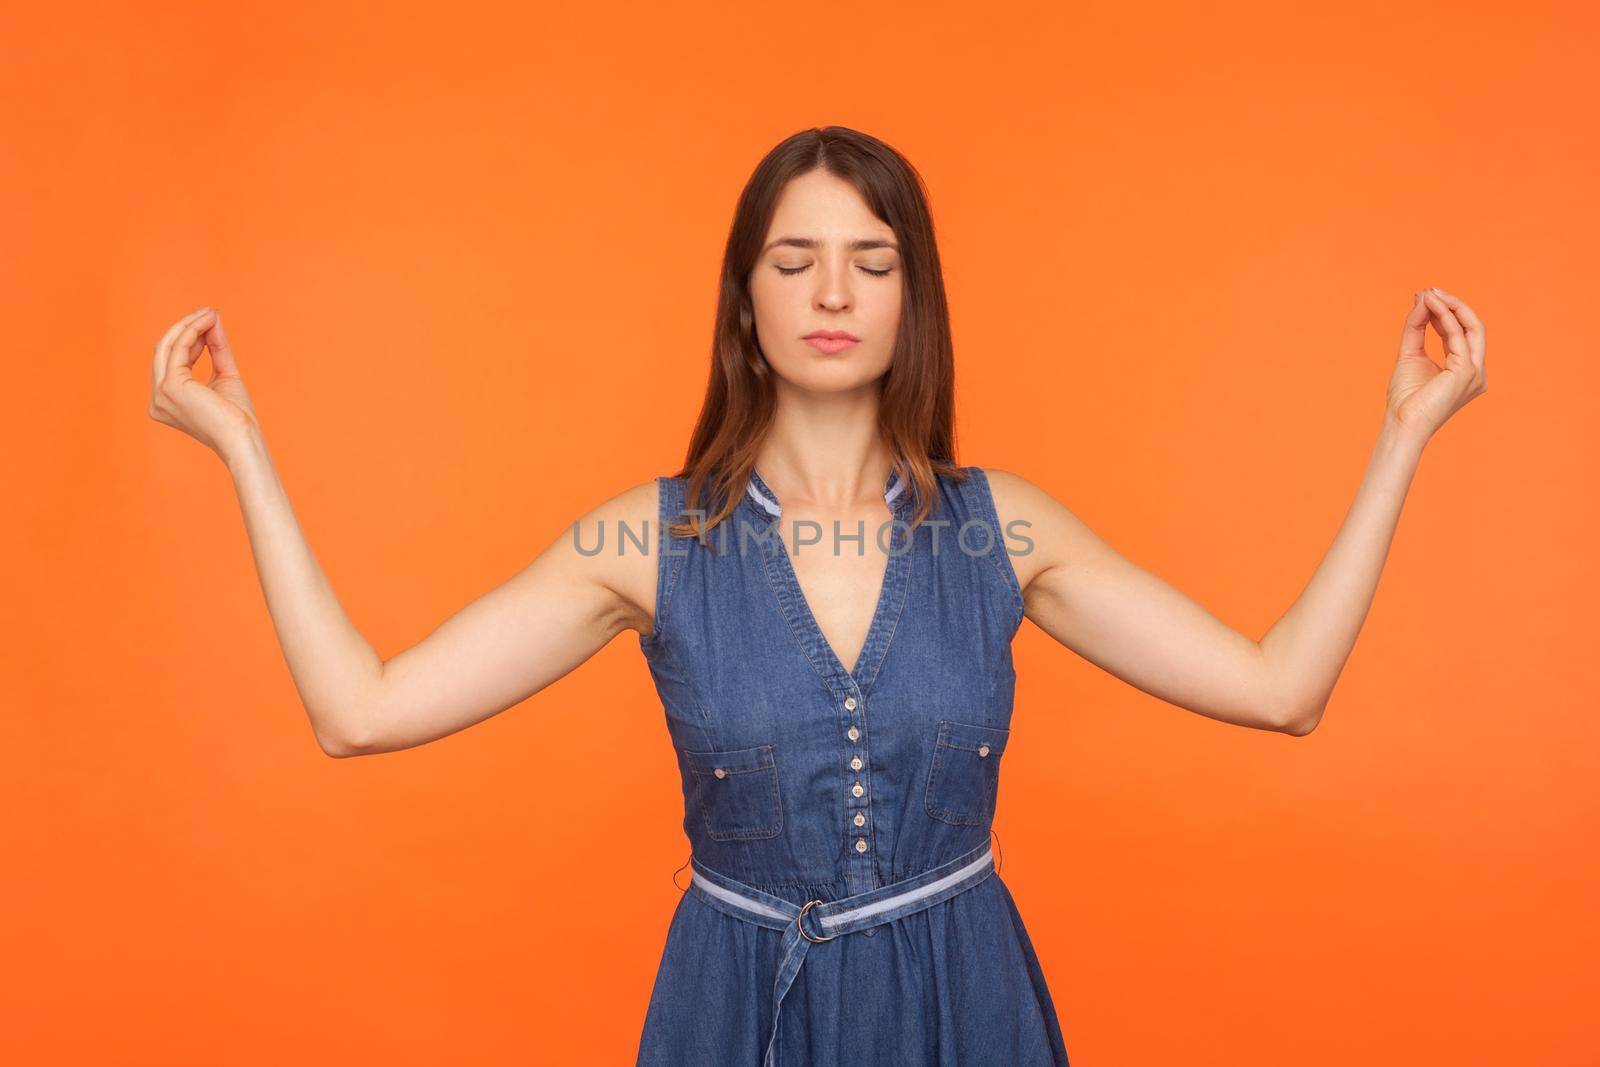 Portrait of young emotional woman on orange background. by Khosro1